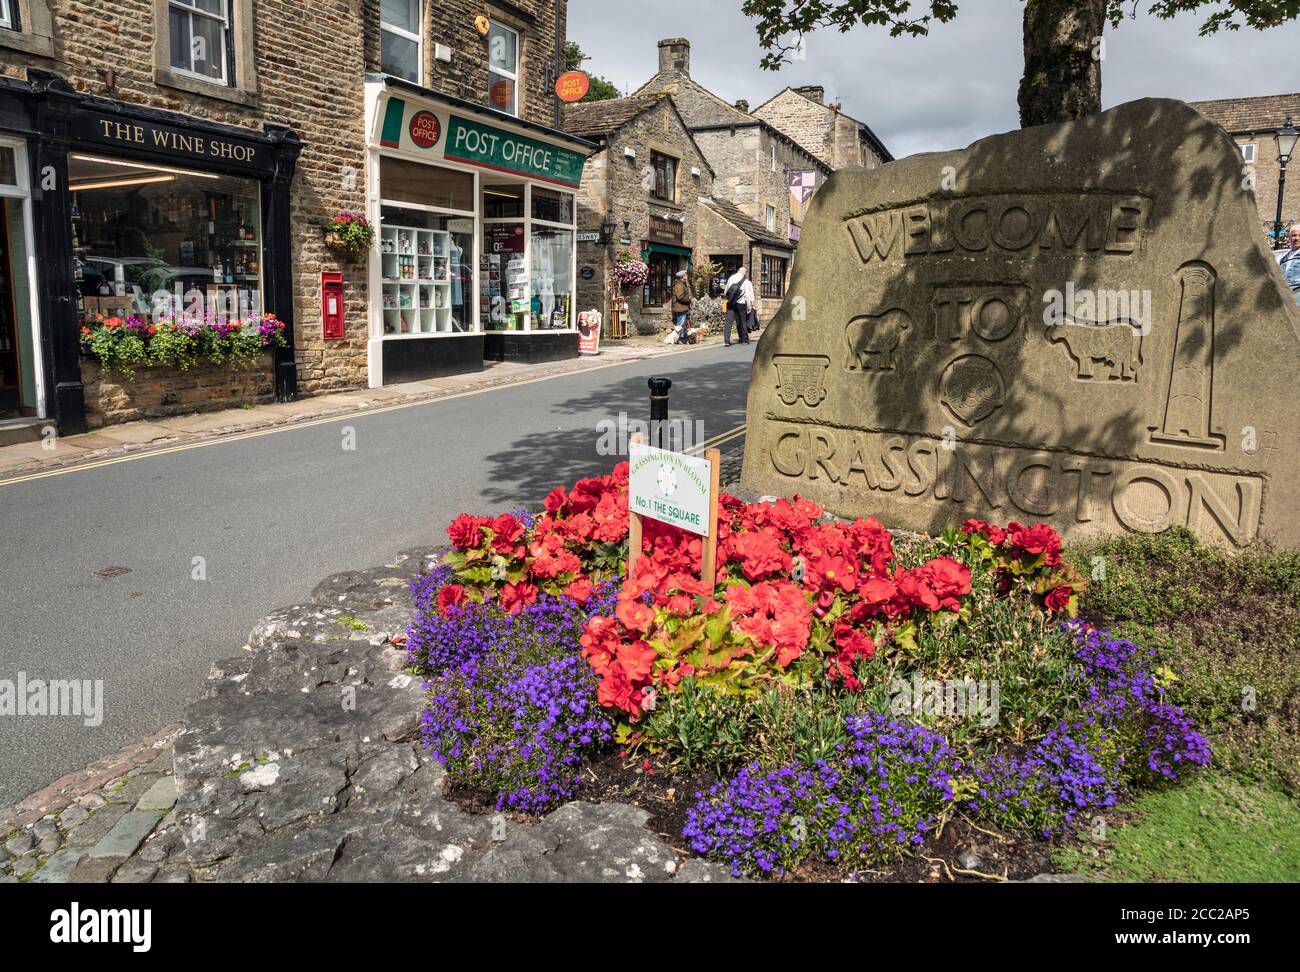 Welcome sign in Grassington, Wharfedale, Yorkshire Dales National Park, North Yorkshire, England, UK Stock Photo